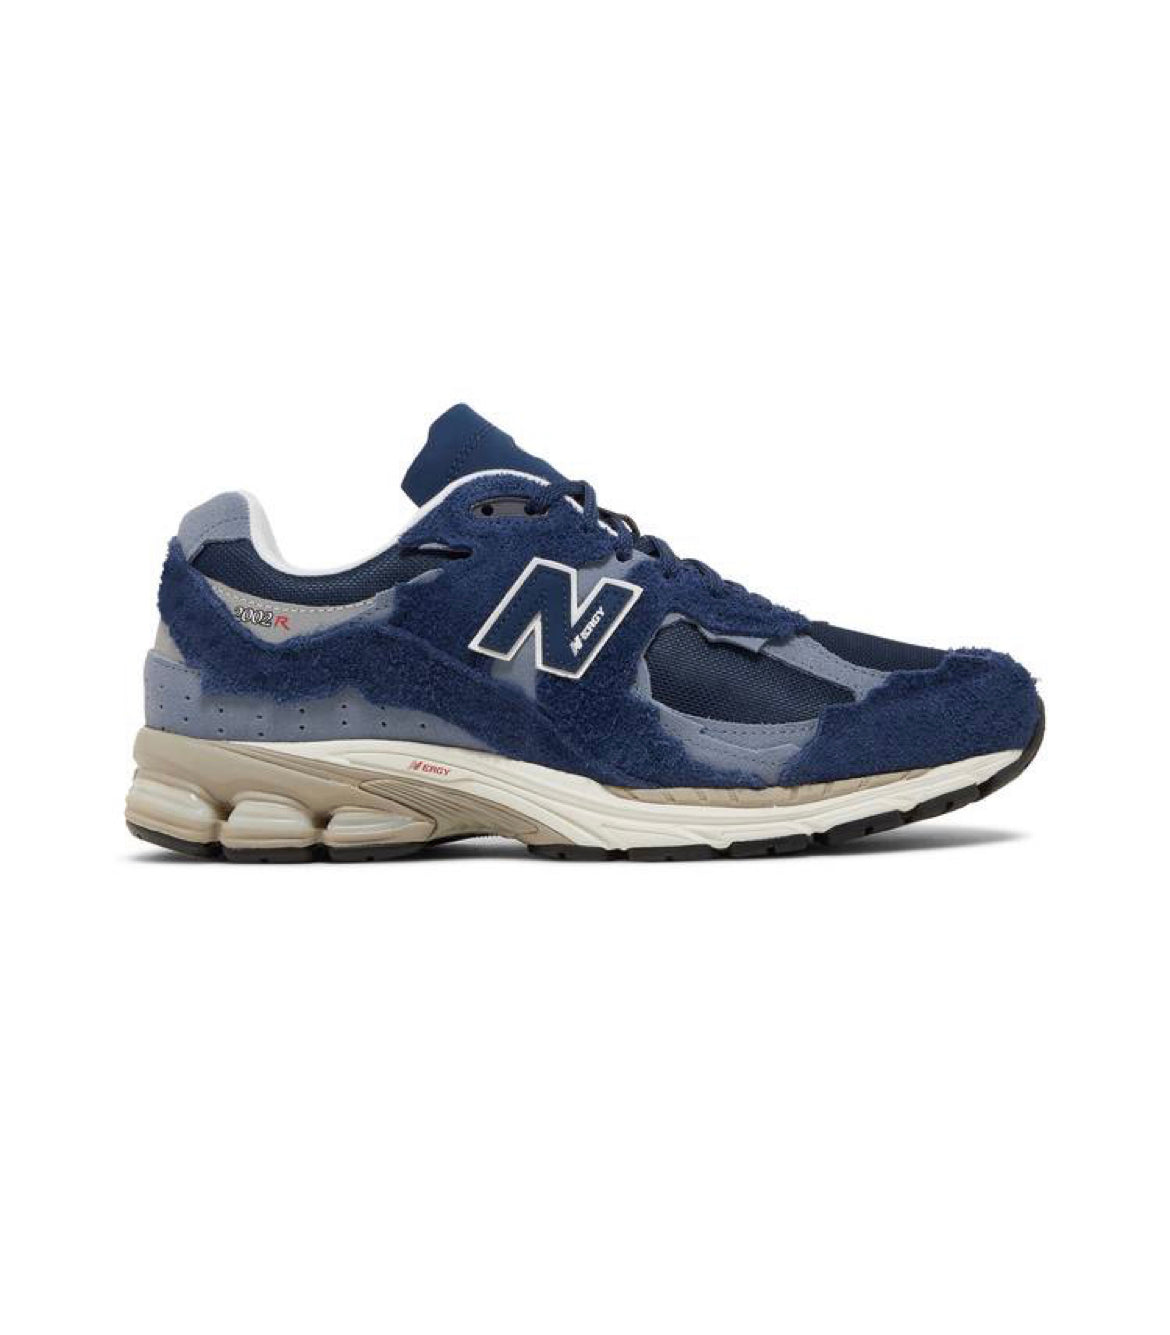 NB 2002R Protection Pack ‘Navy Grey’ M2002RDK